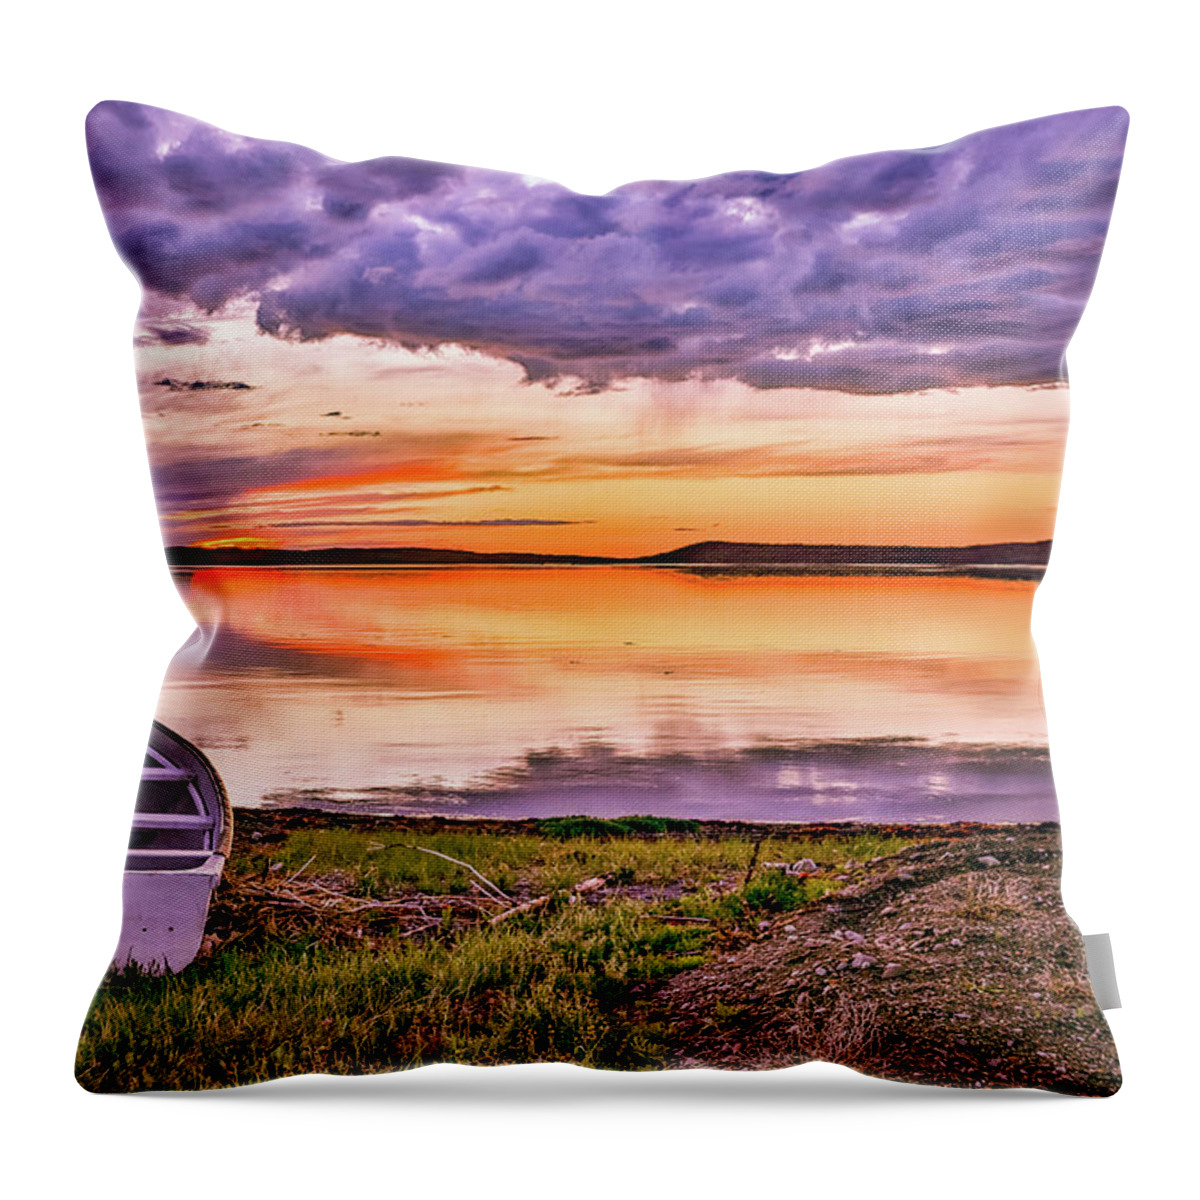  Throw Pillow featuring the photograph Sunset by Paul James Bannerman